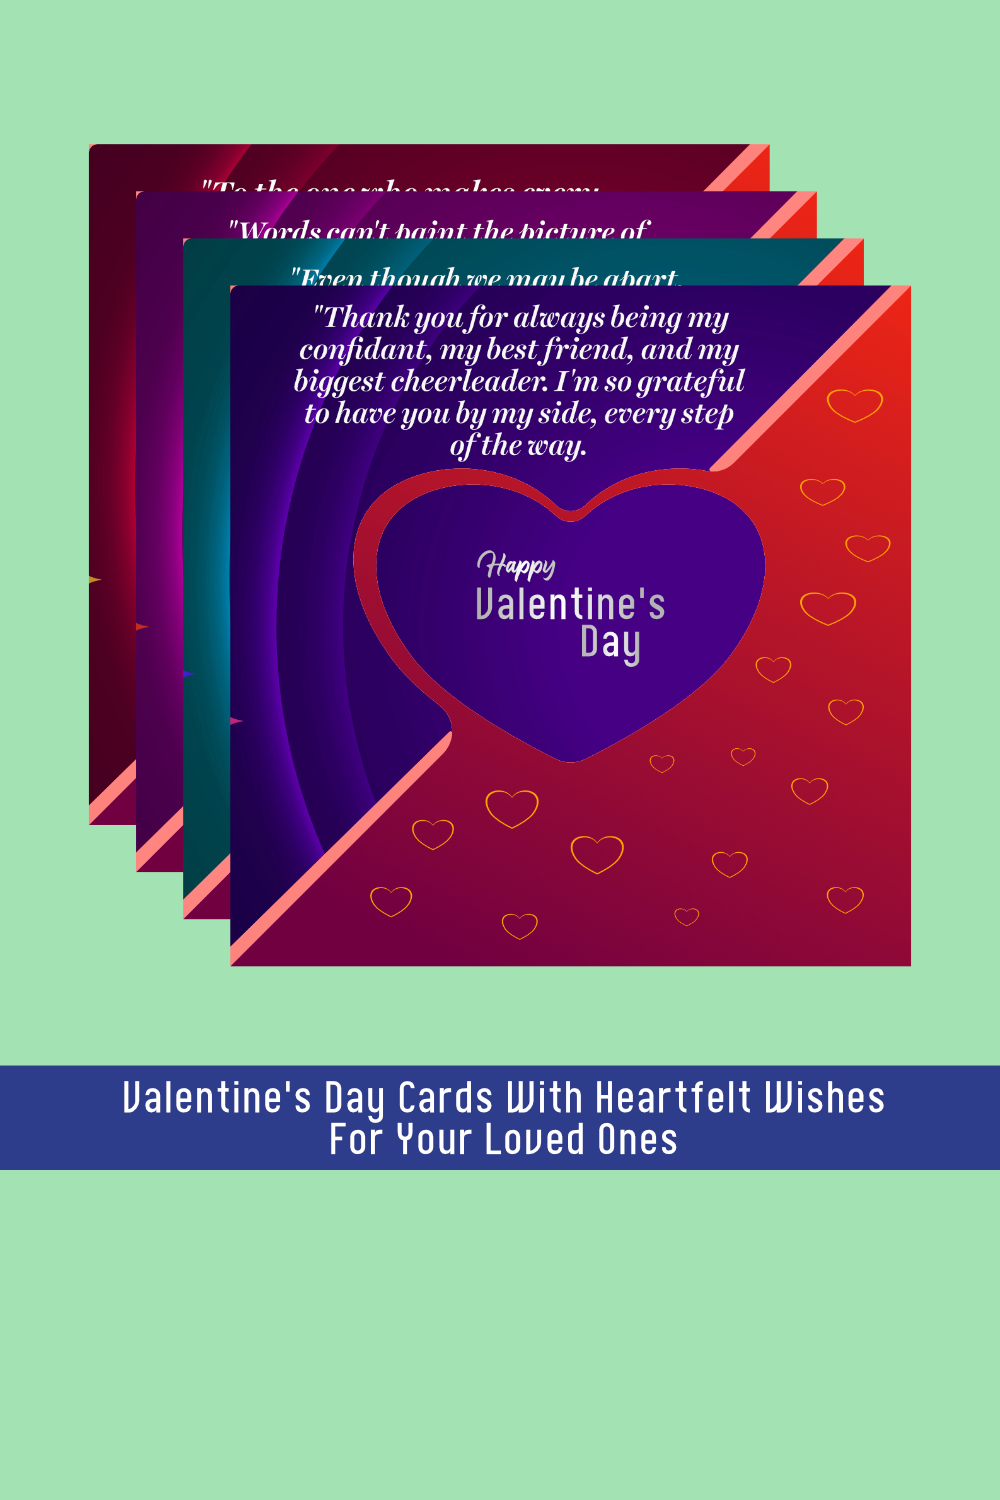 4 Beautifully Designed Vector Valentine’s Day Cards with Heartfelt Wishes for Your Loved Ones, Friends and Well-Wishers pinterest preview image.